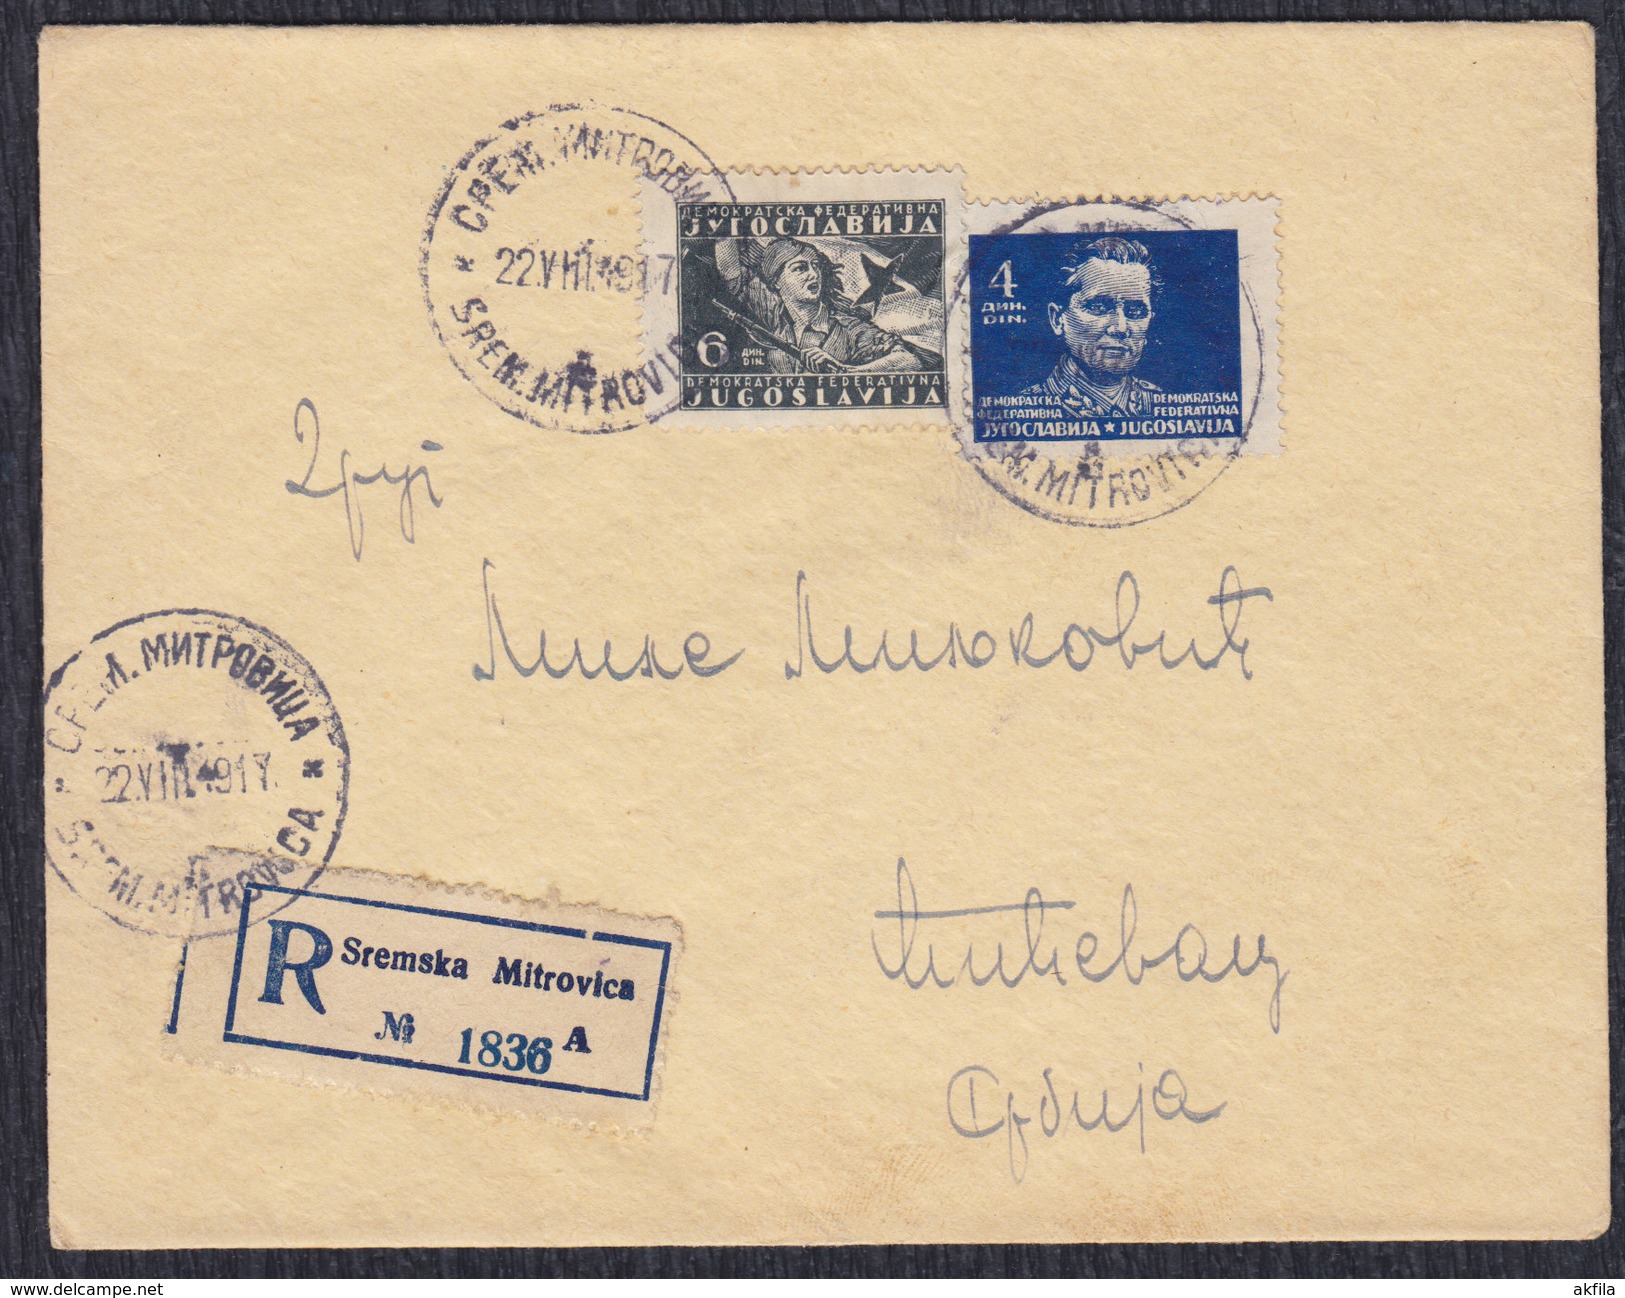 Yugoslavia 1949 Marshal Tito, Recommended Letter Sent From Sremska Mitrovica To Cicevac - Covers & Documents